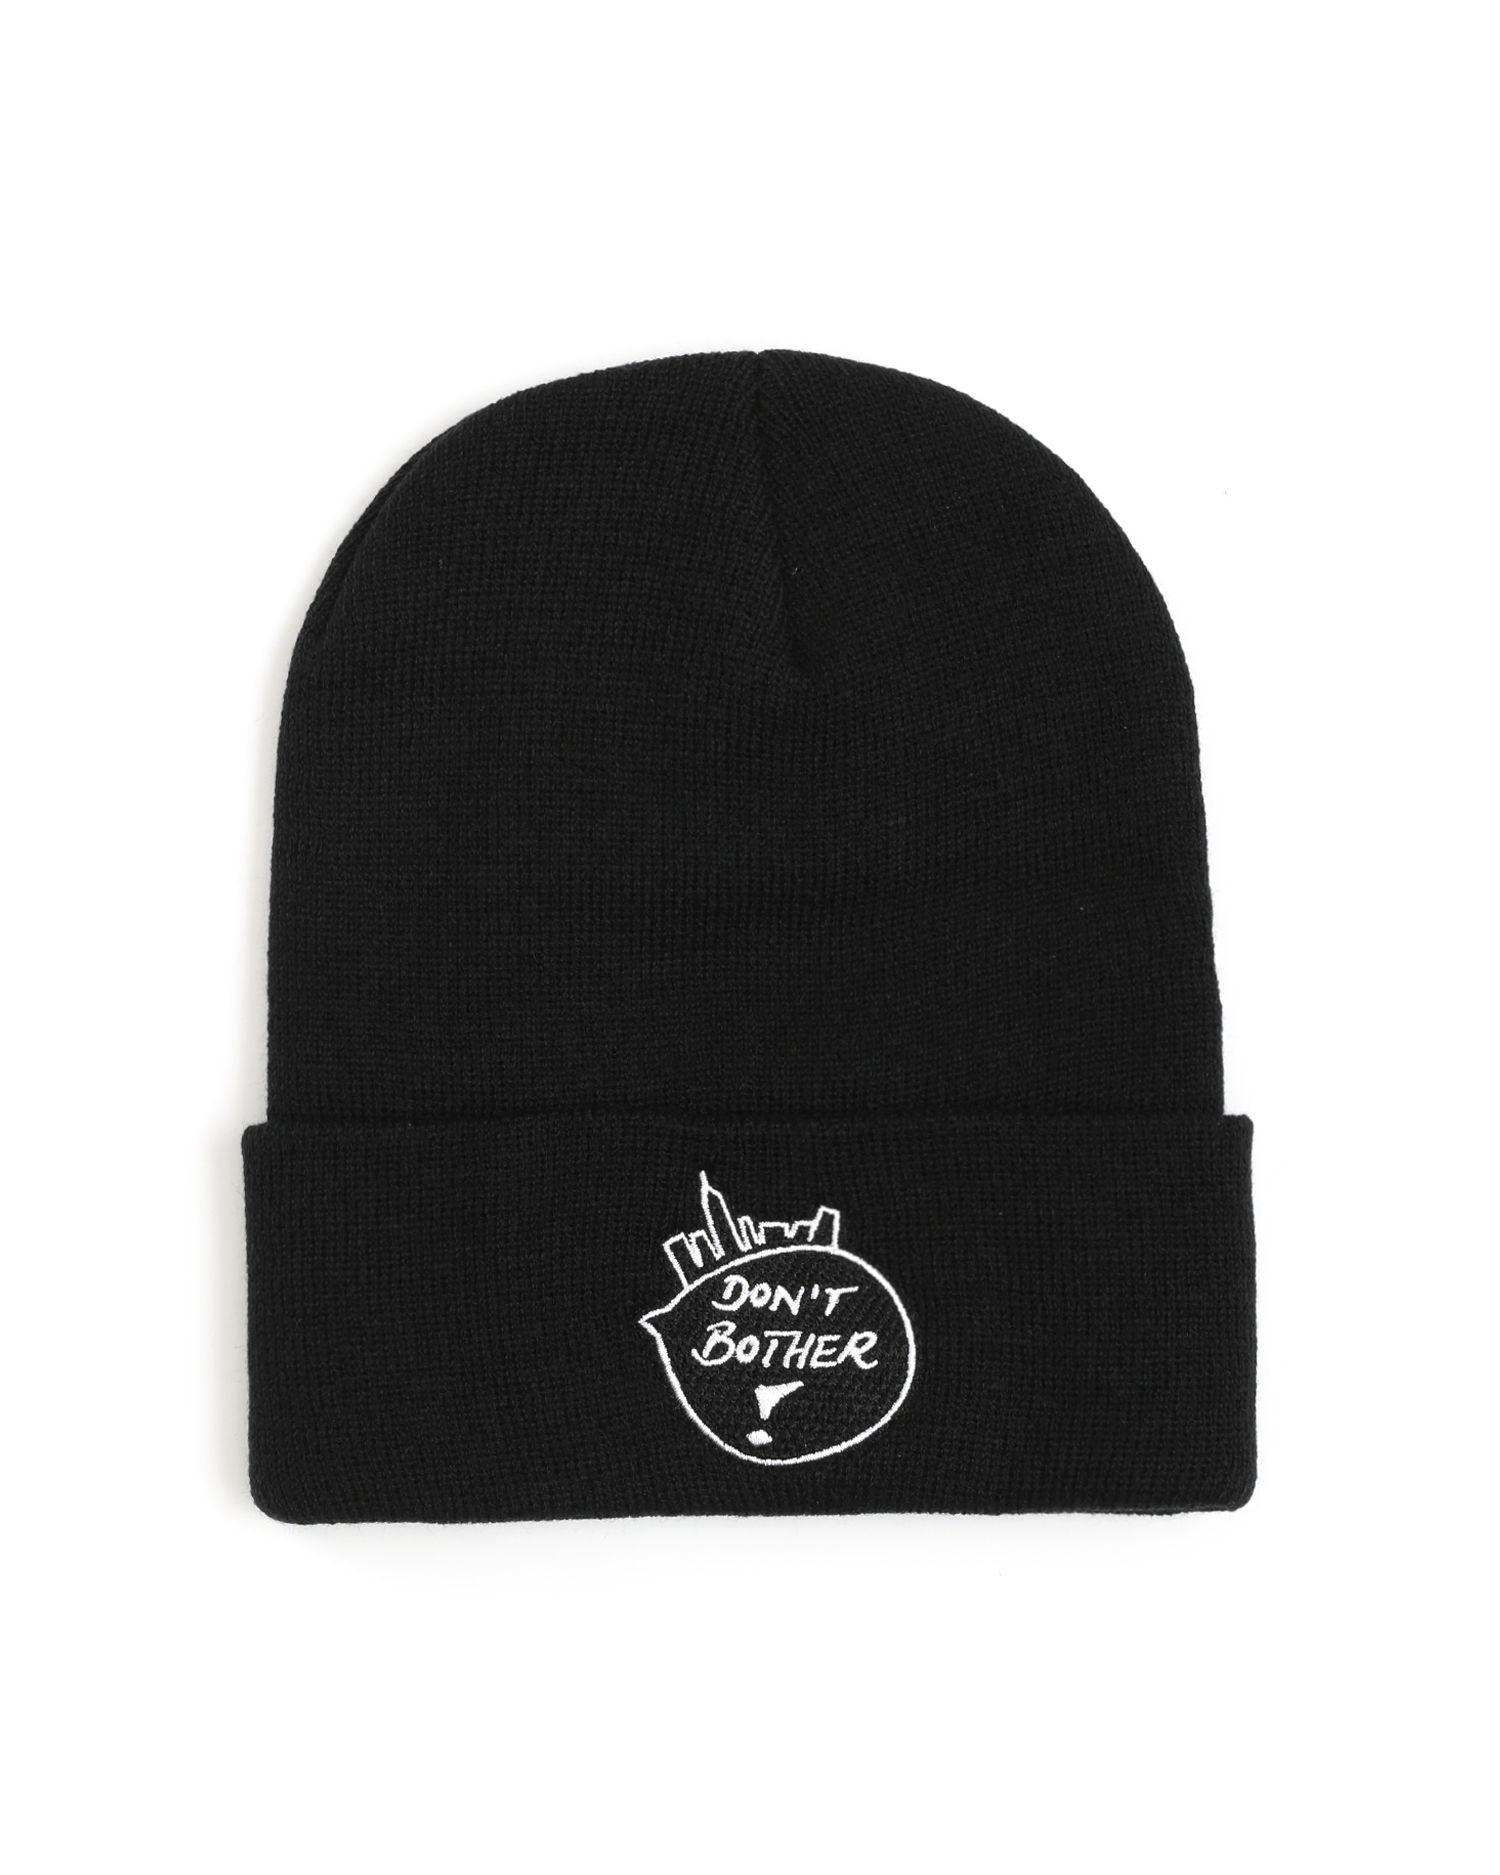 "Don't Bother!" beanie by AFTER MIDNIGHT